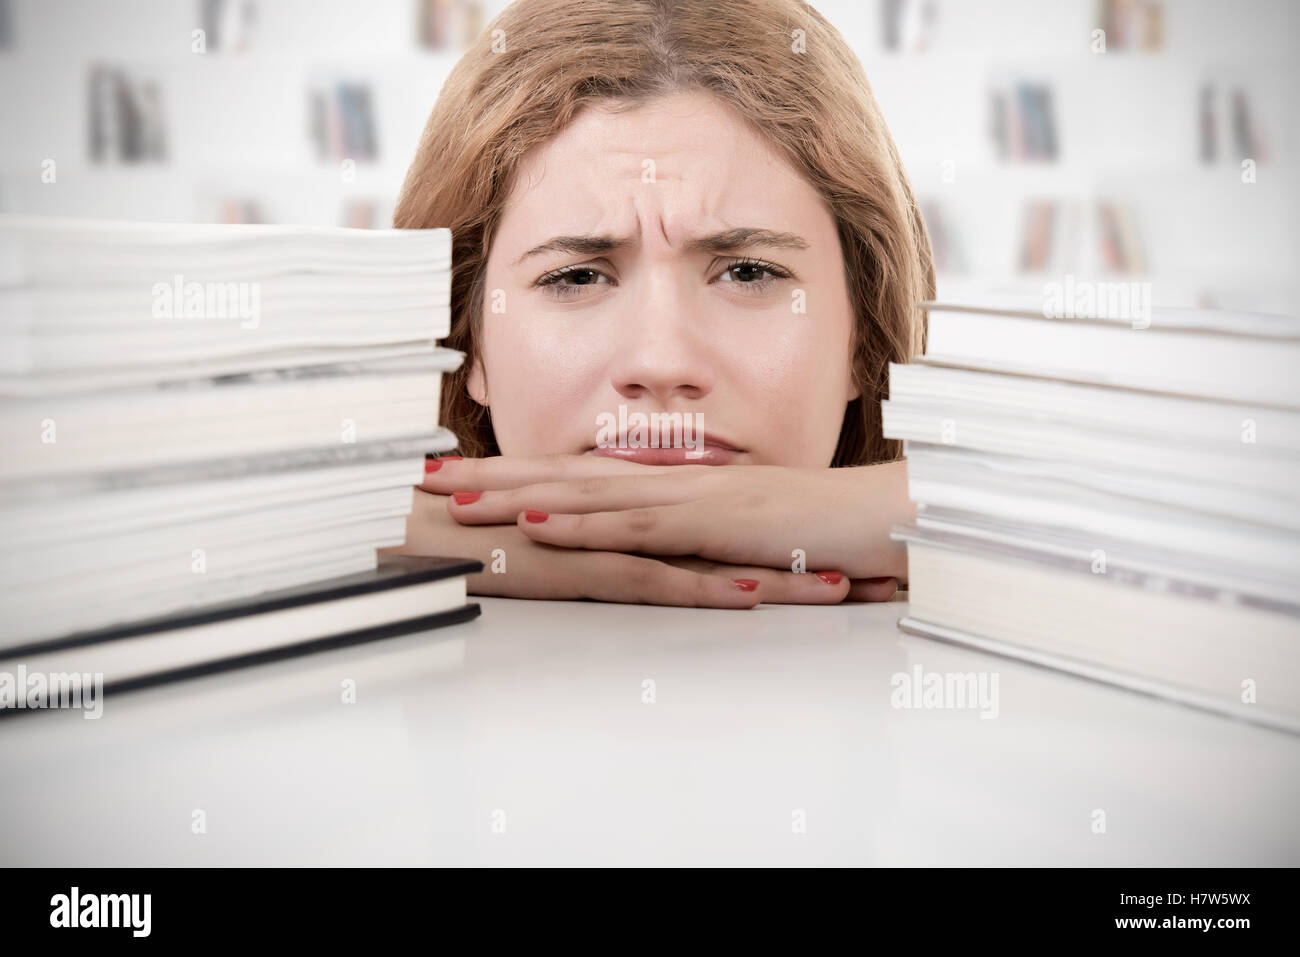 Young woman tired of studying hard for her exams Stock Photo